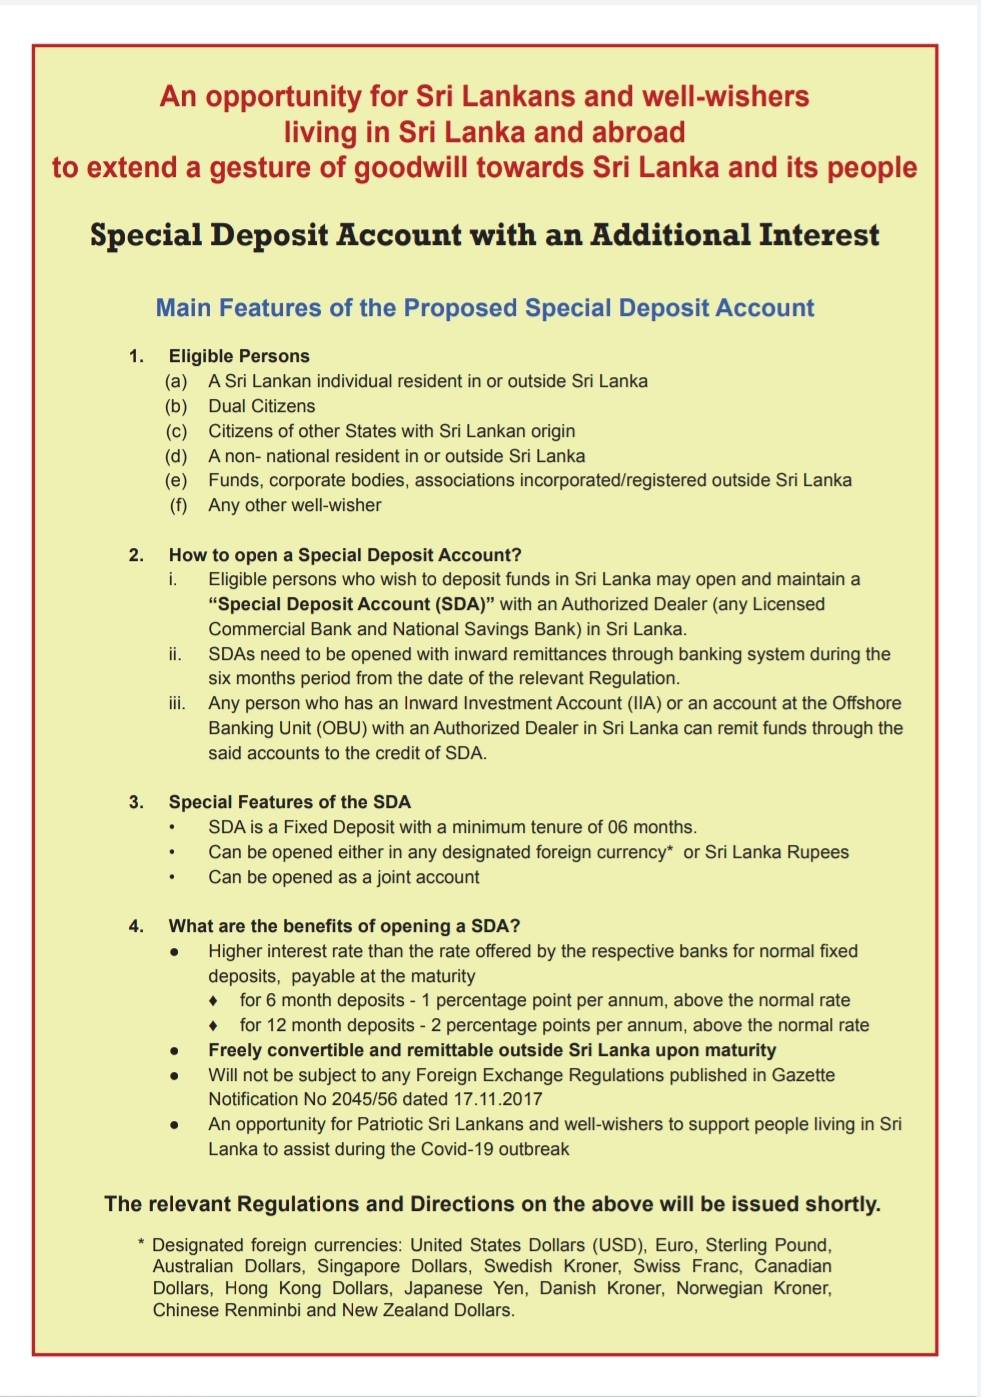 Special Deposit Account with an Additional Interest